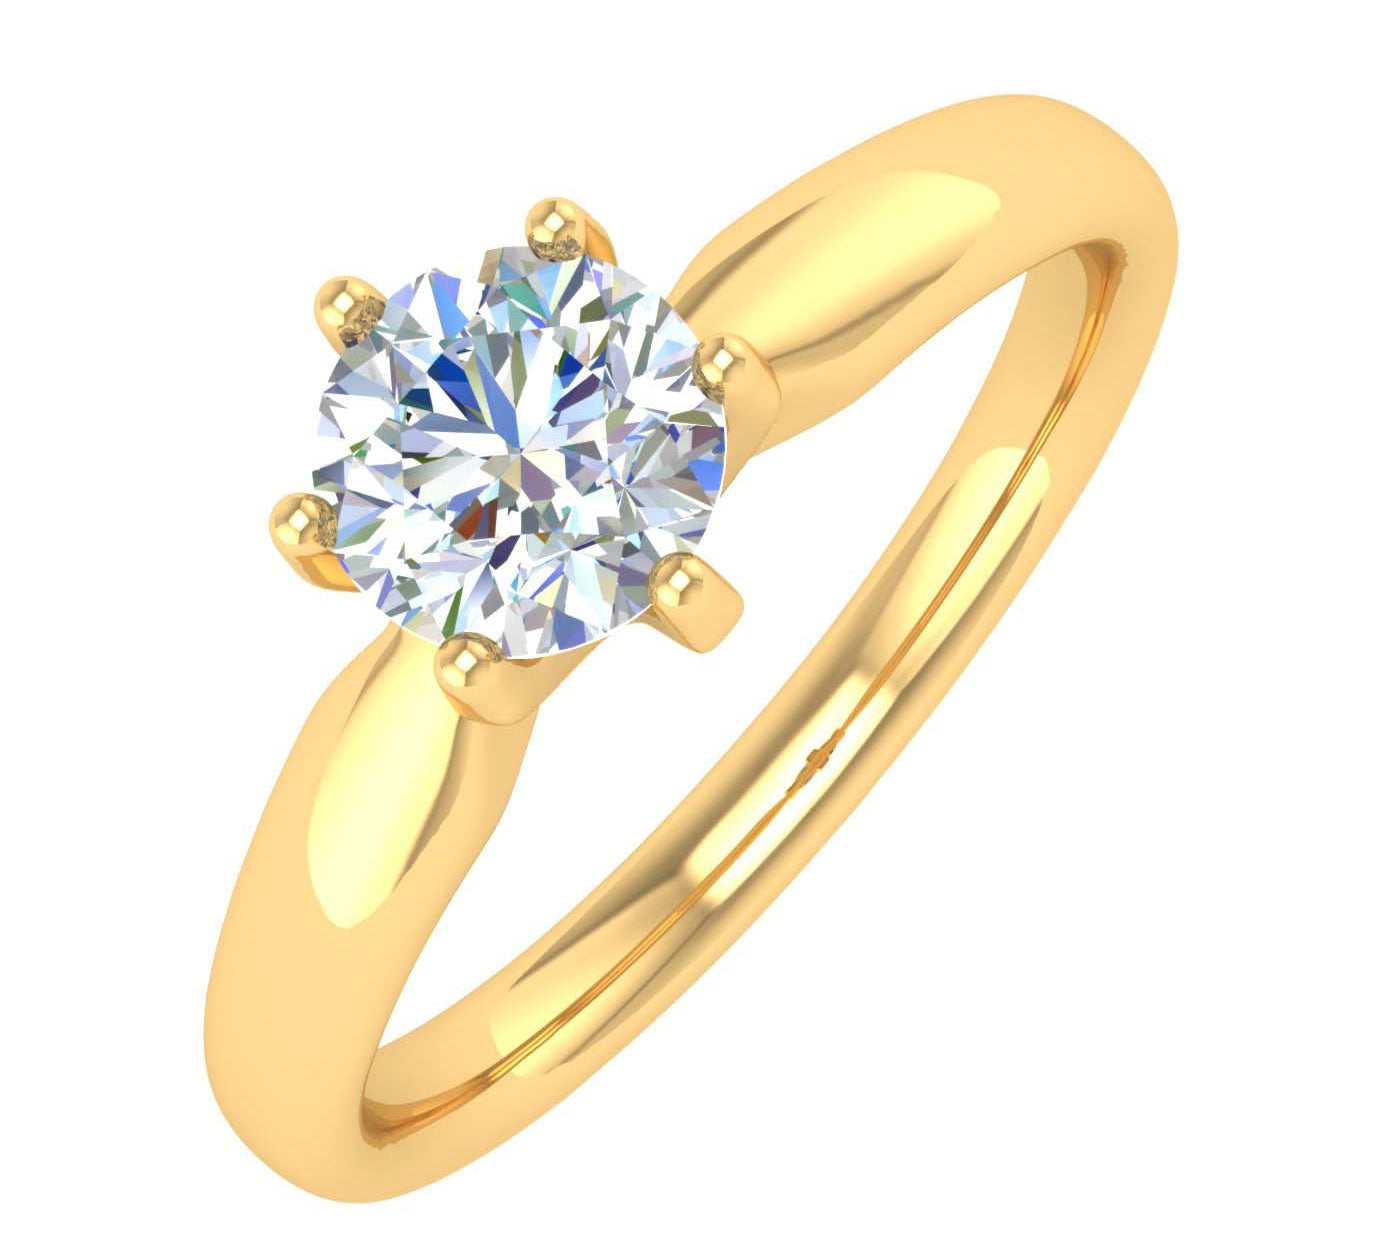 1/2 Carat 6-Prong Set Diamond Solitaire Engagement Ring in Gold - IGI Certified